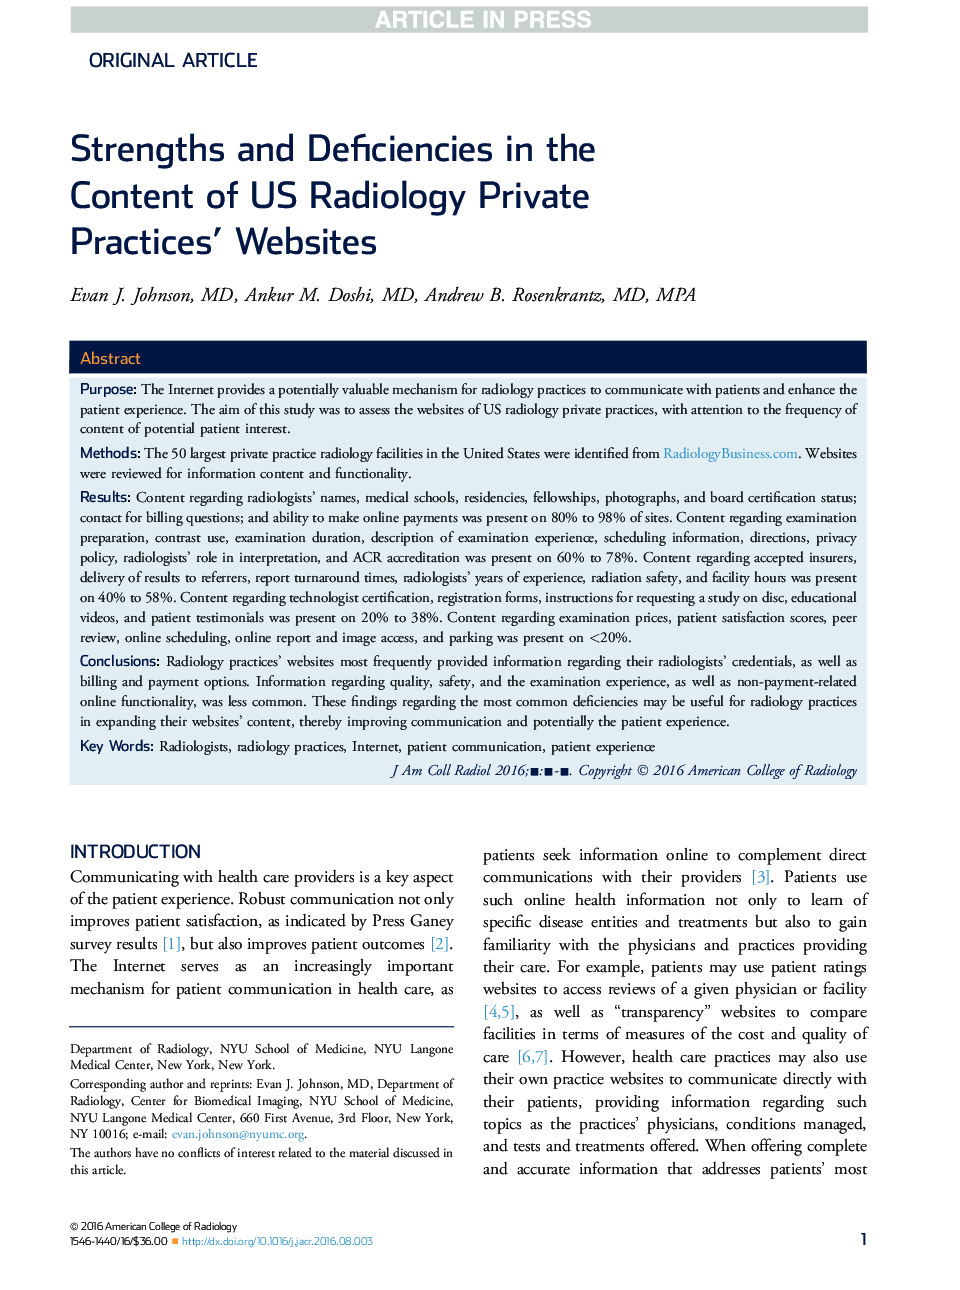 Strengths and Deficiencies in the ContentÂ of US Radiology Private Practices'Â Websites